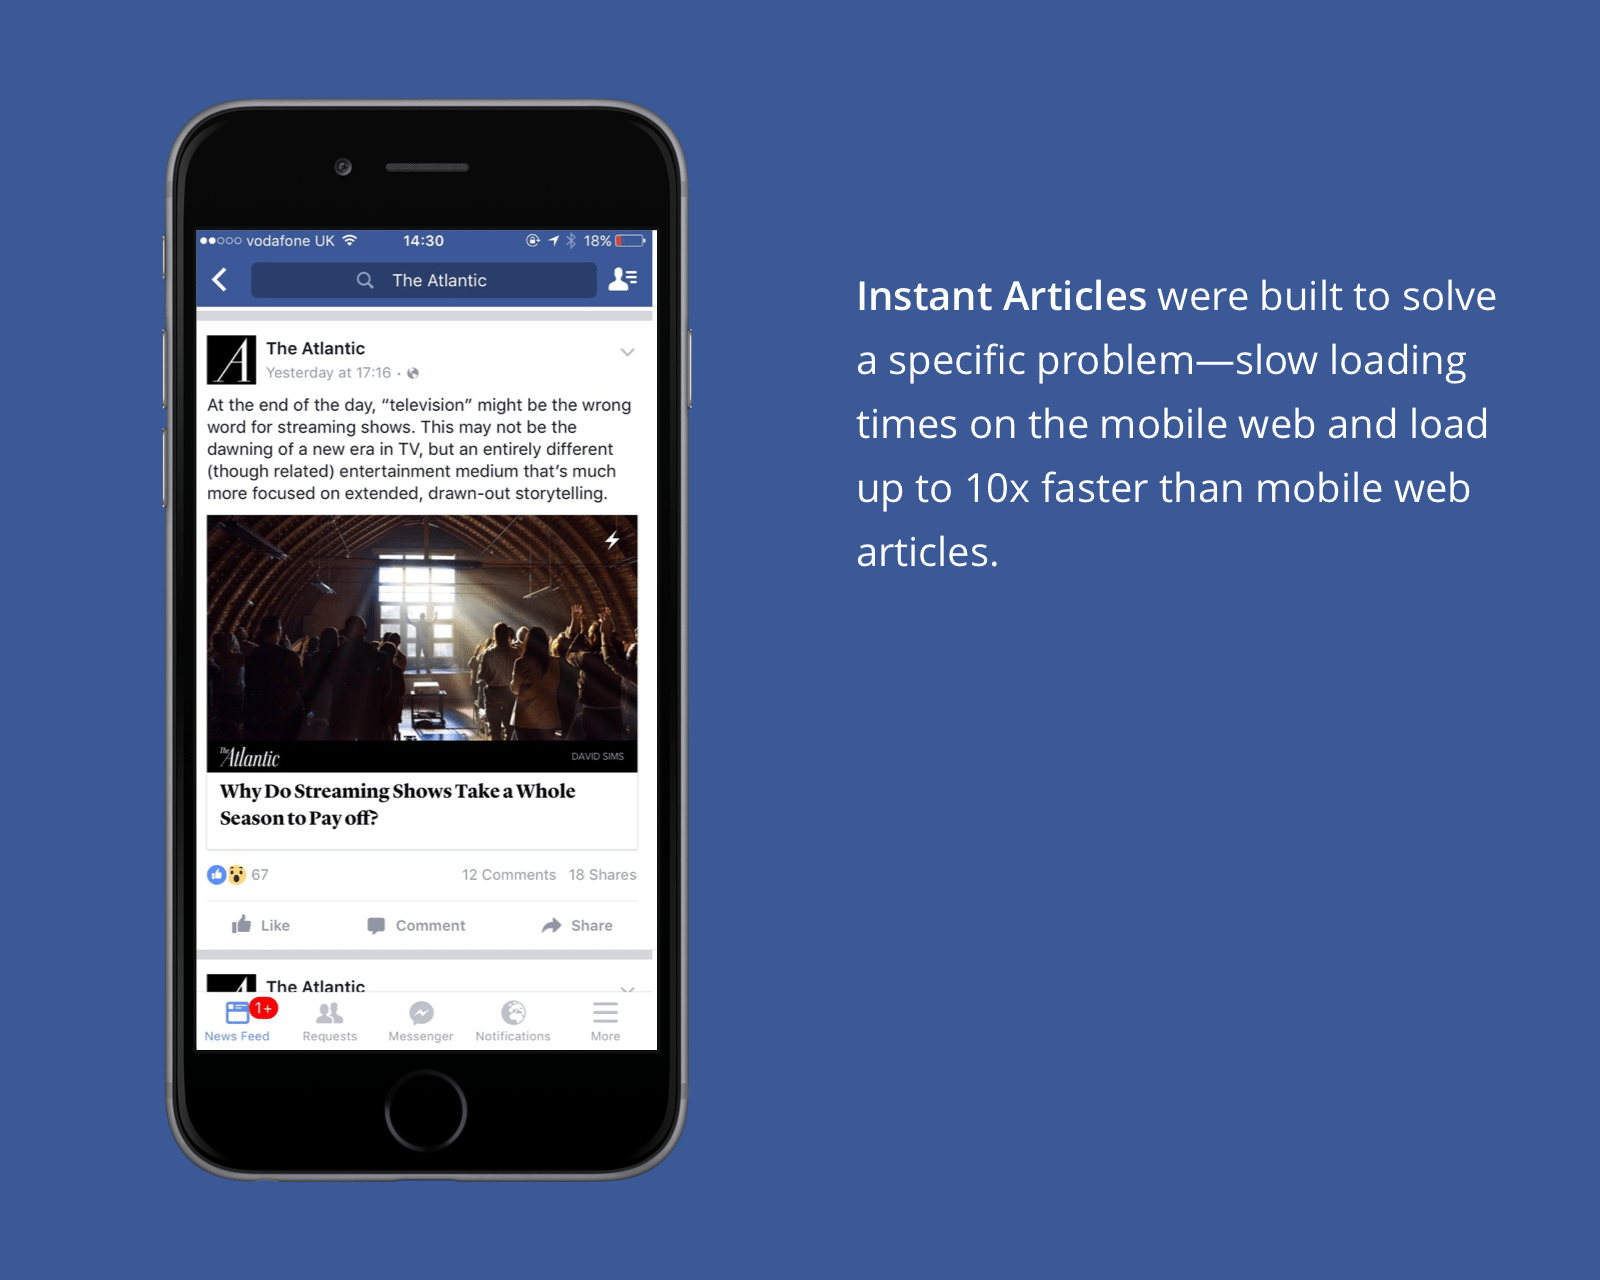 The gains from Facebook Instant Articles